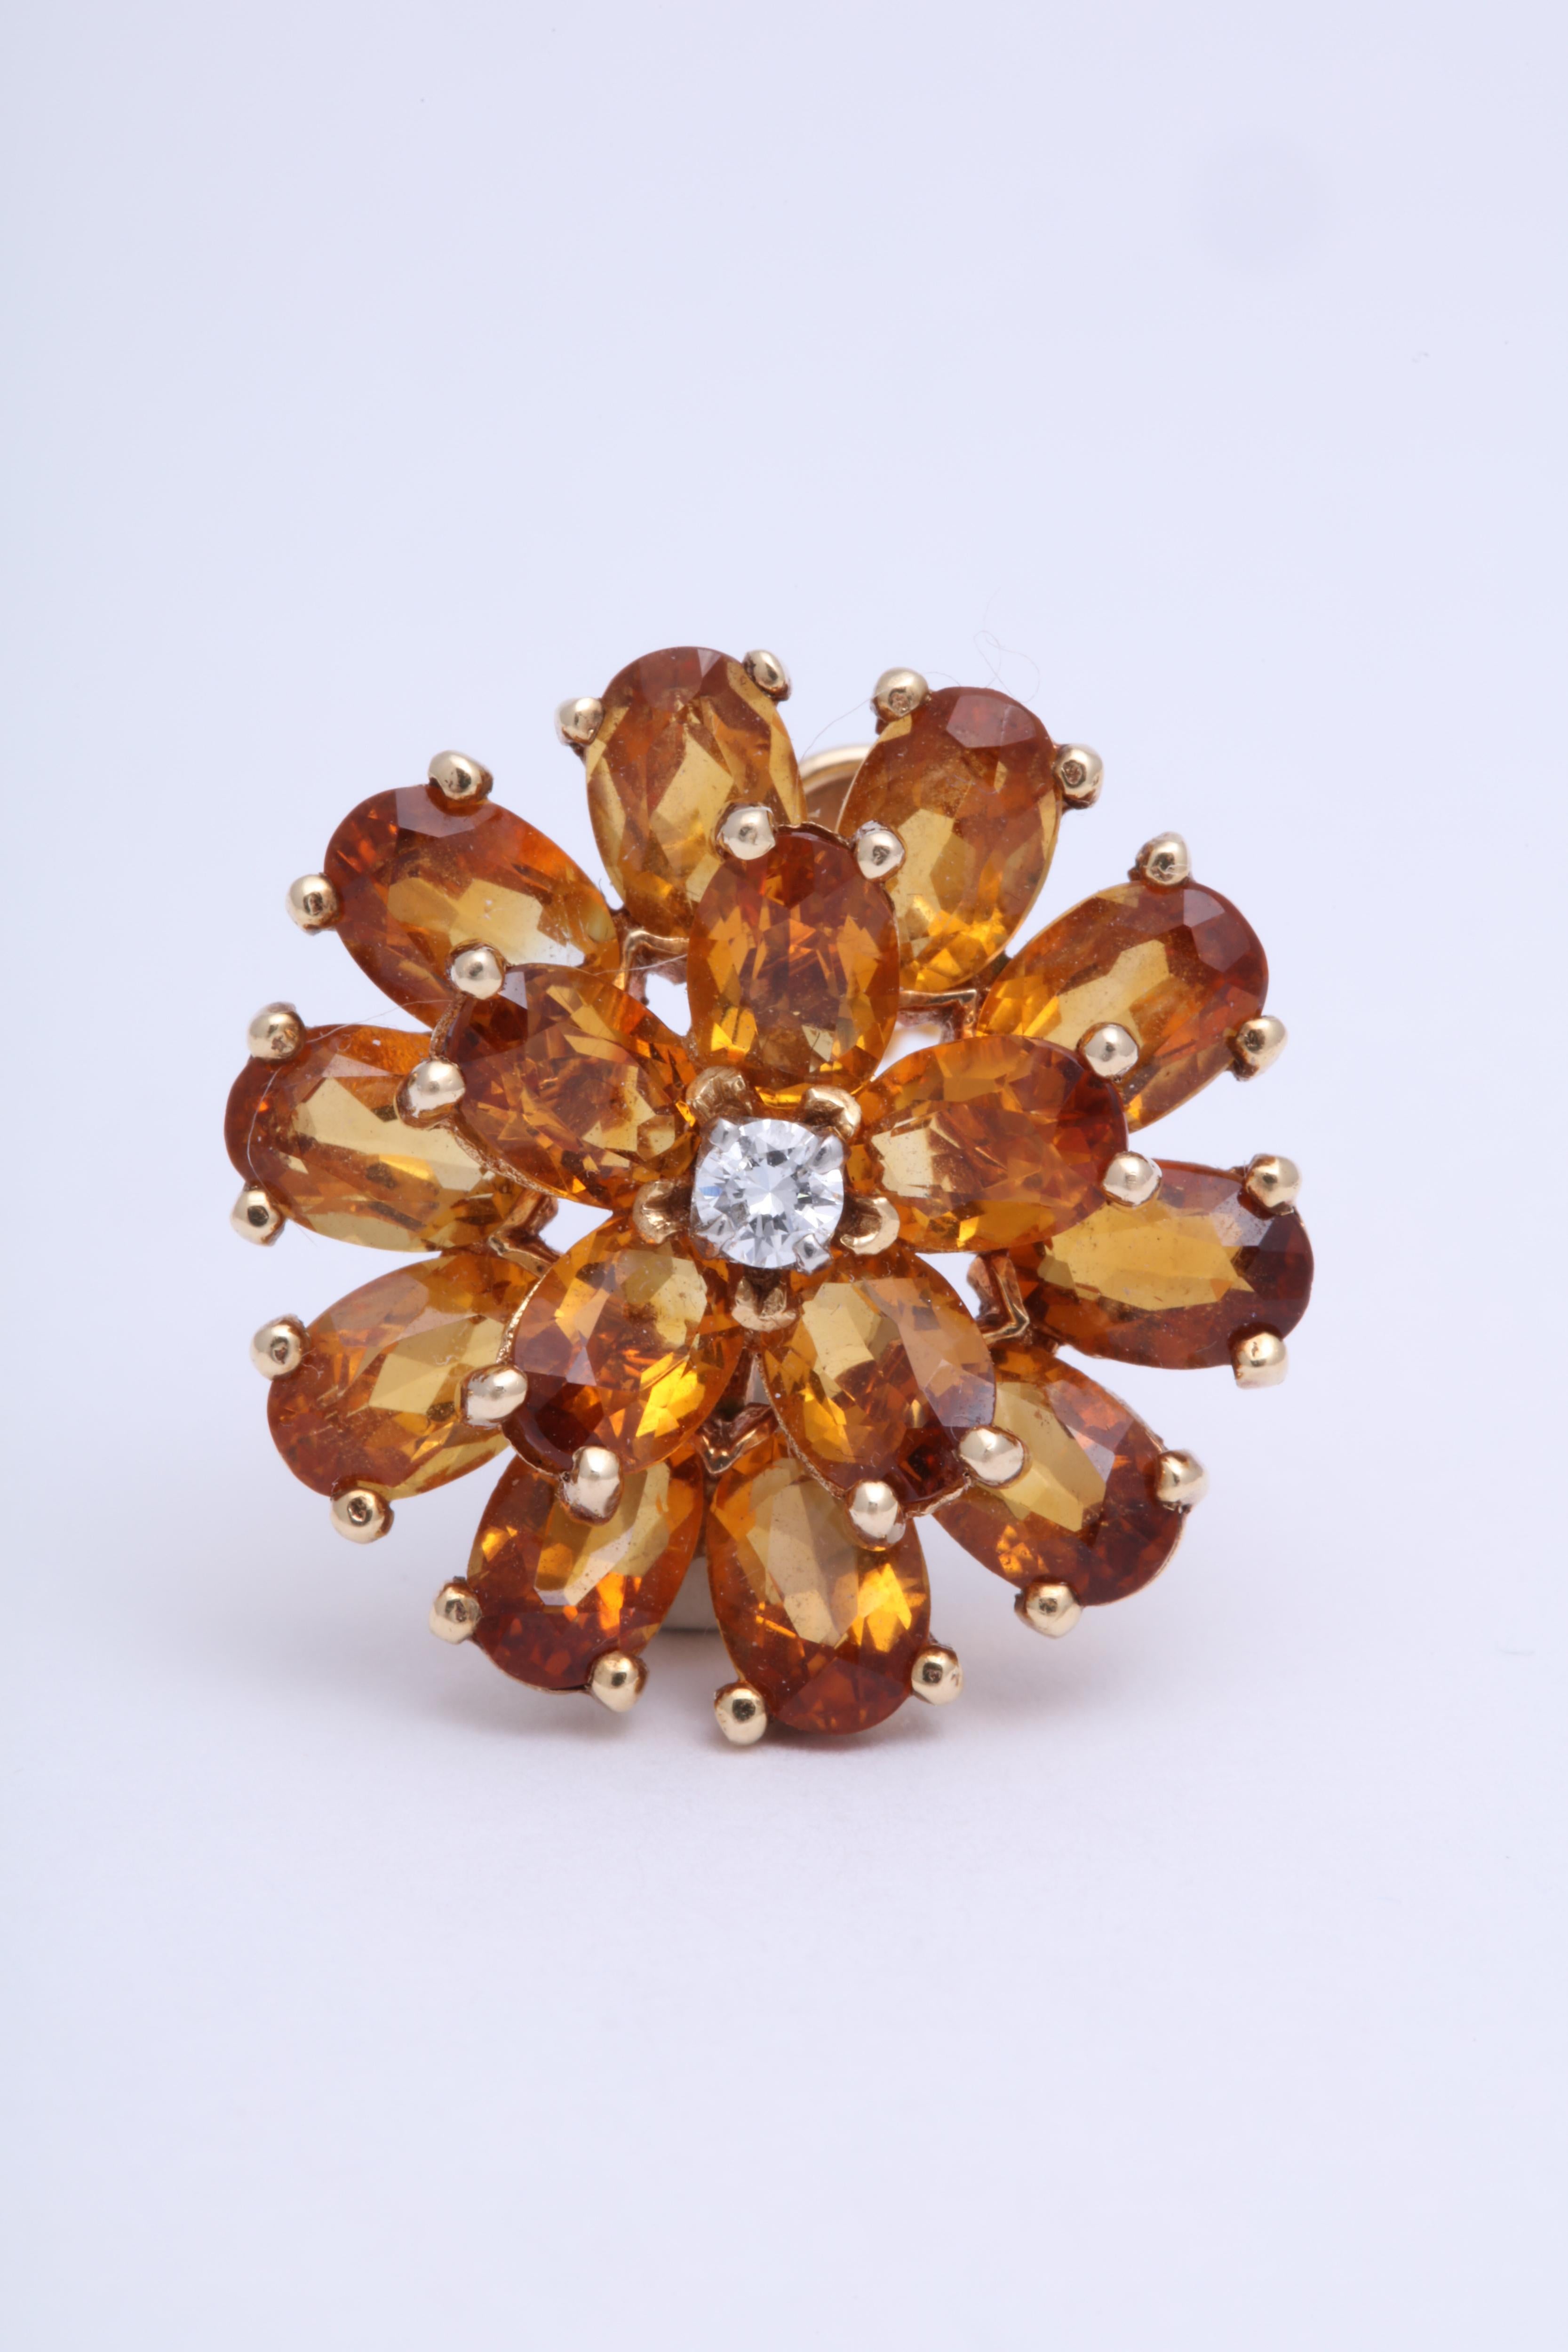 Tiffany floral cluster earrings in 18K yellow gold set with citrine and a central diamond. c. 1945